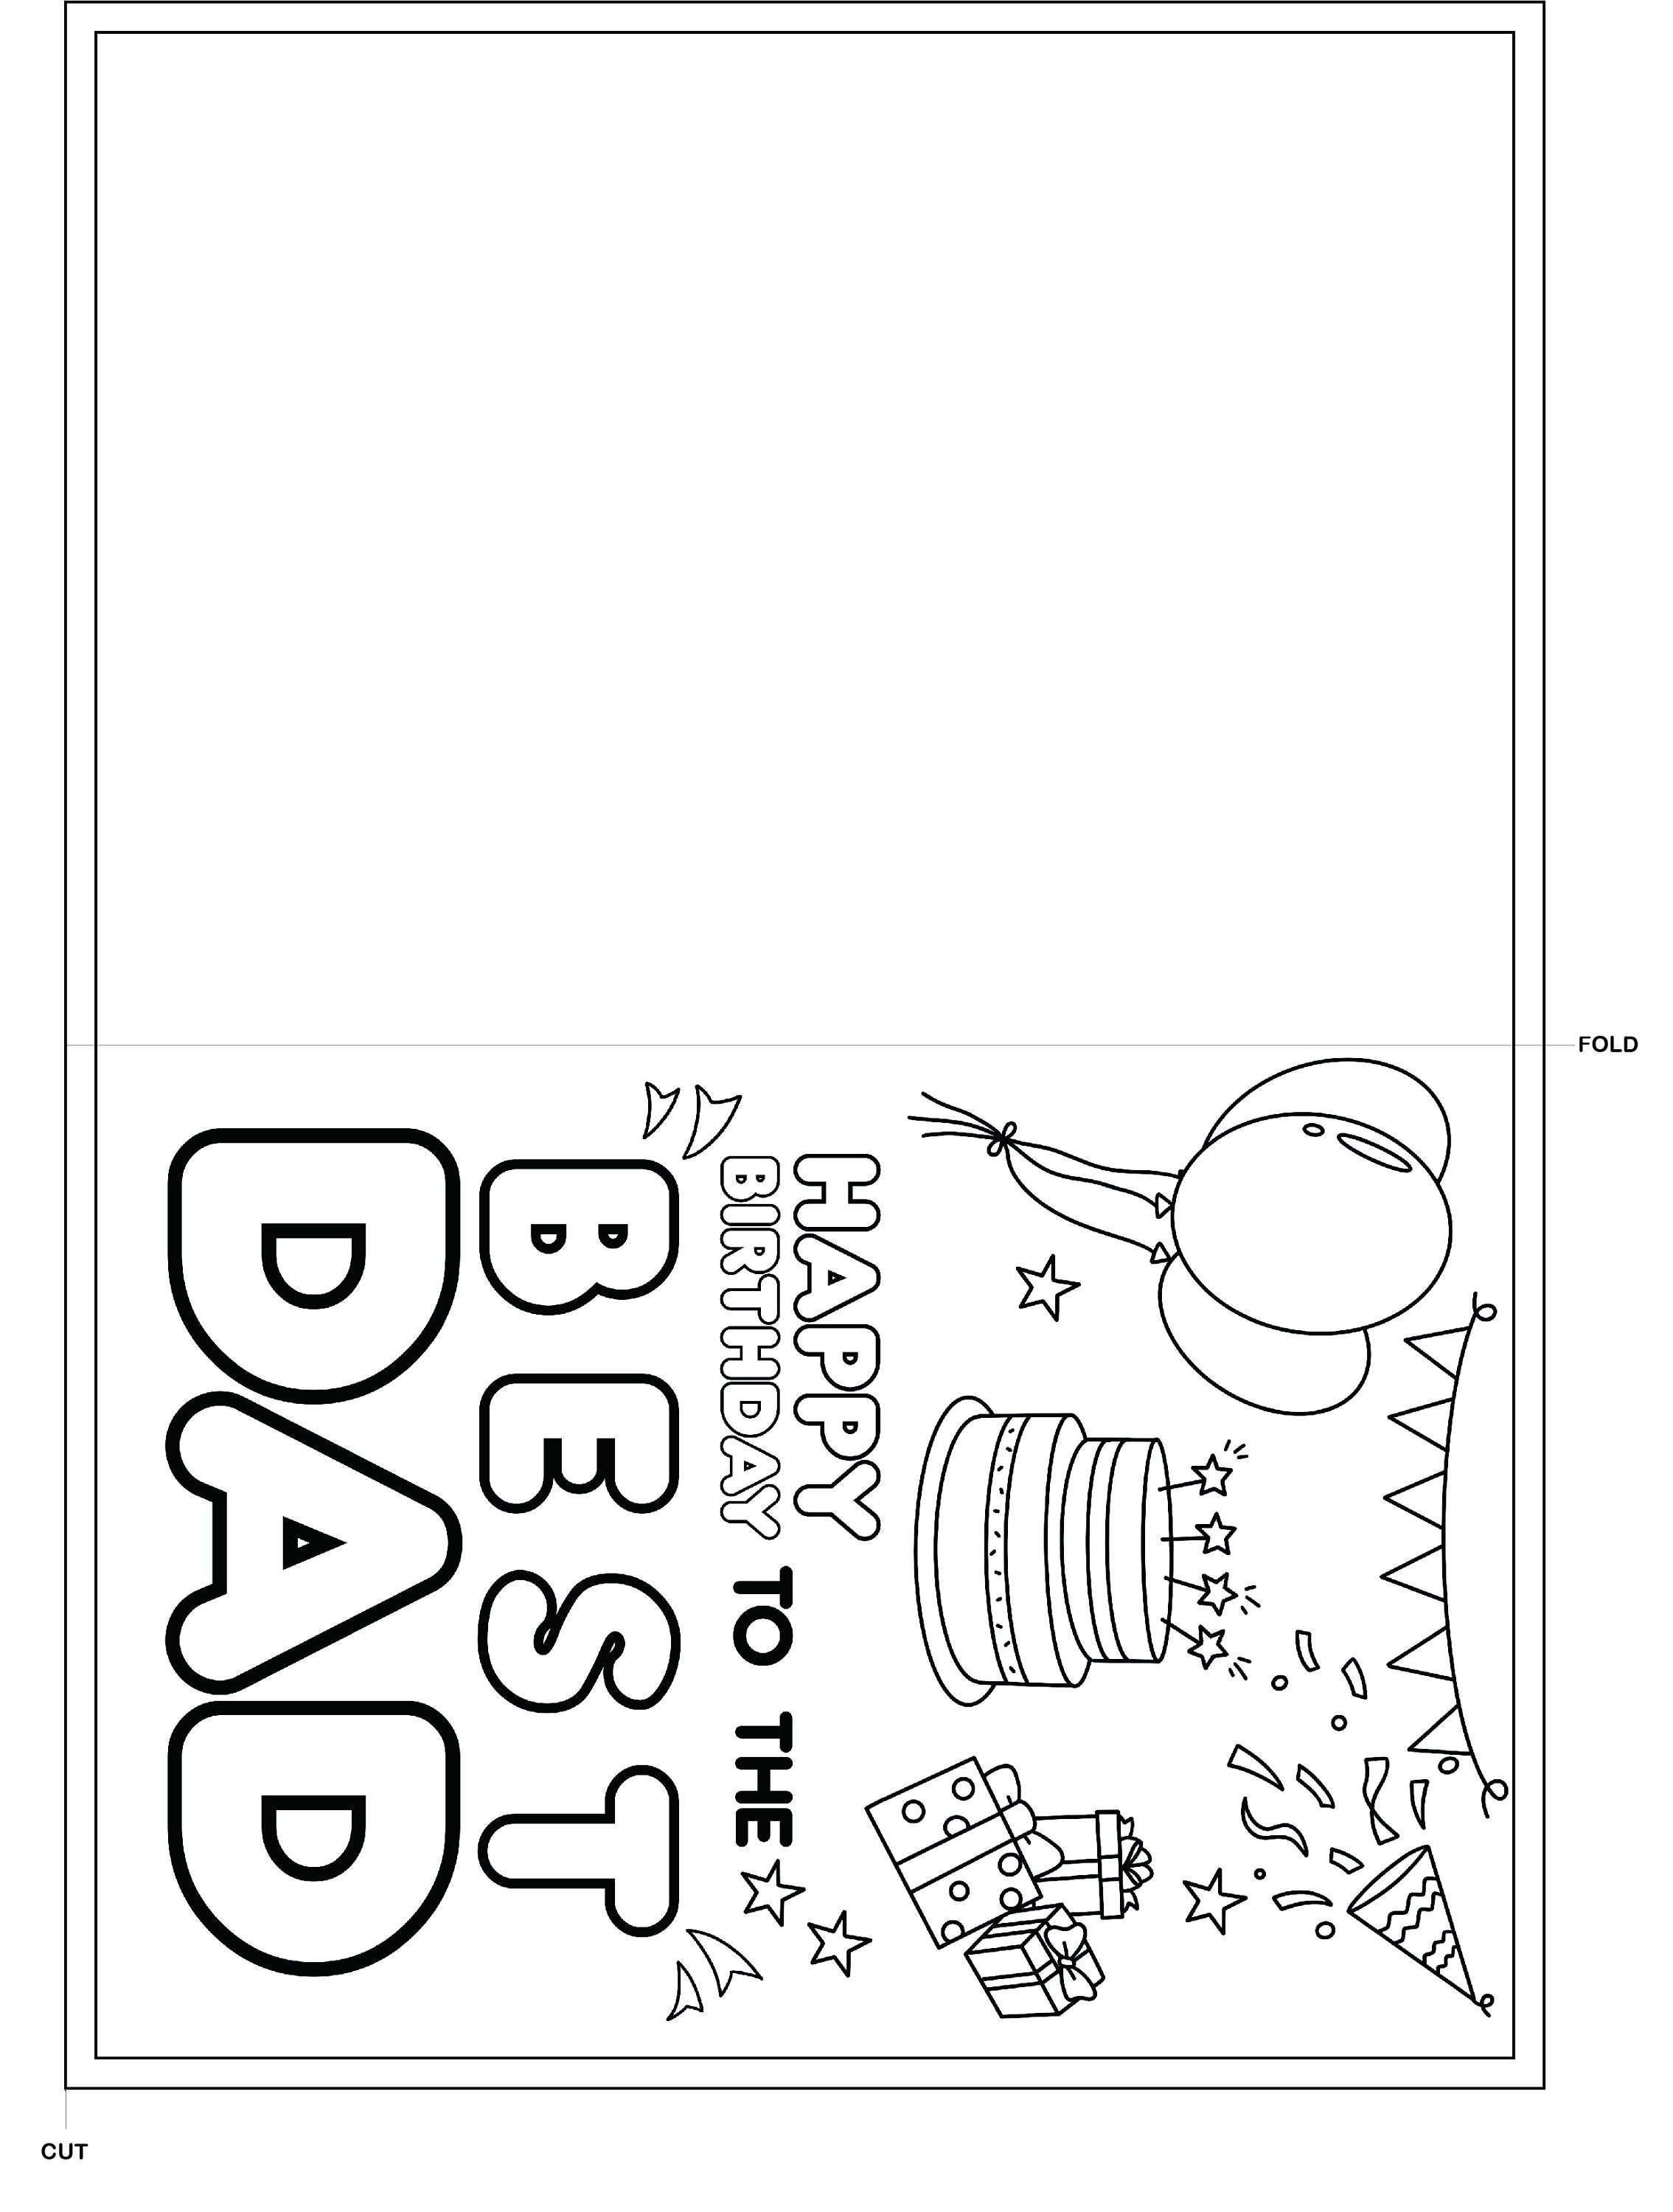 foldable-printable-birthday-cards-for-dad-printable-word-searches